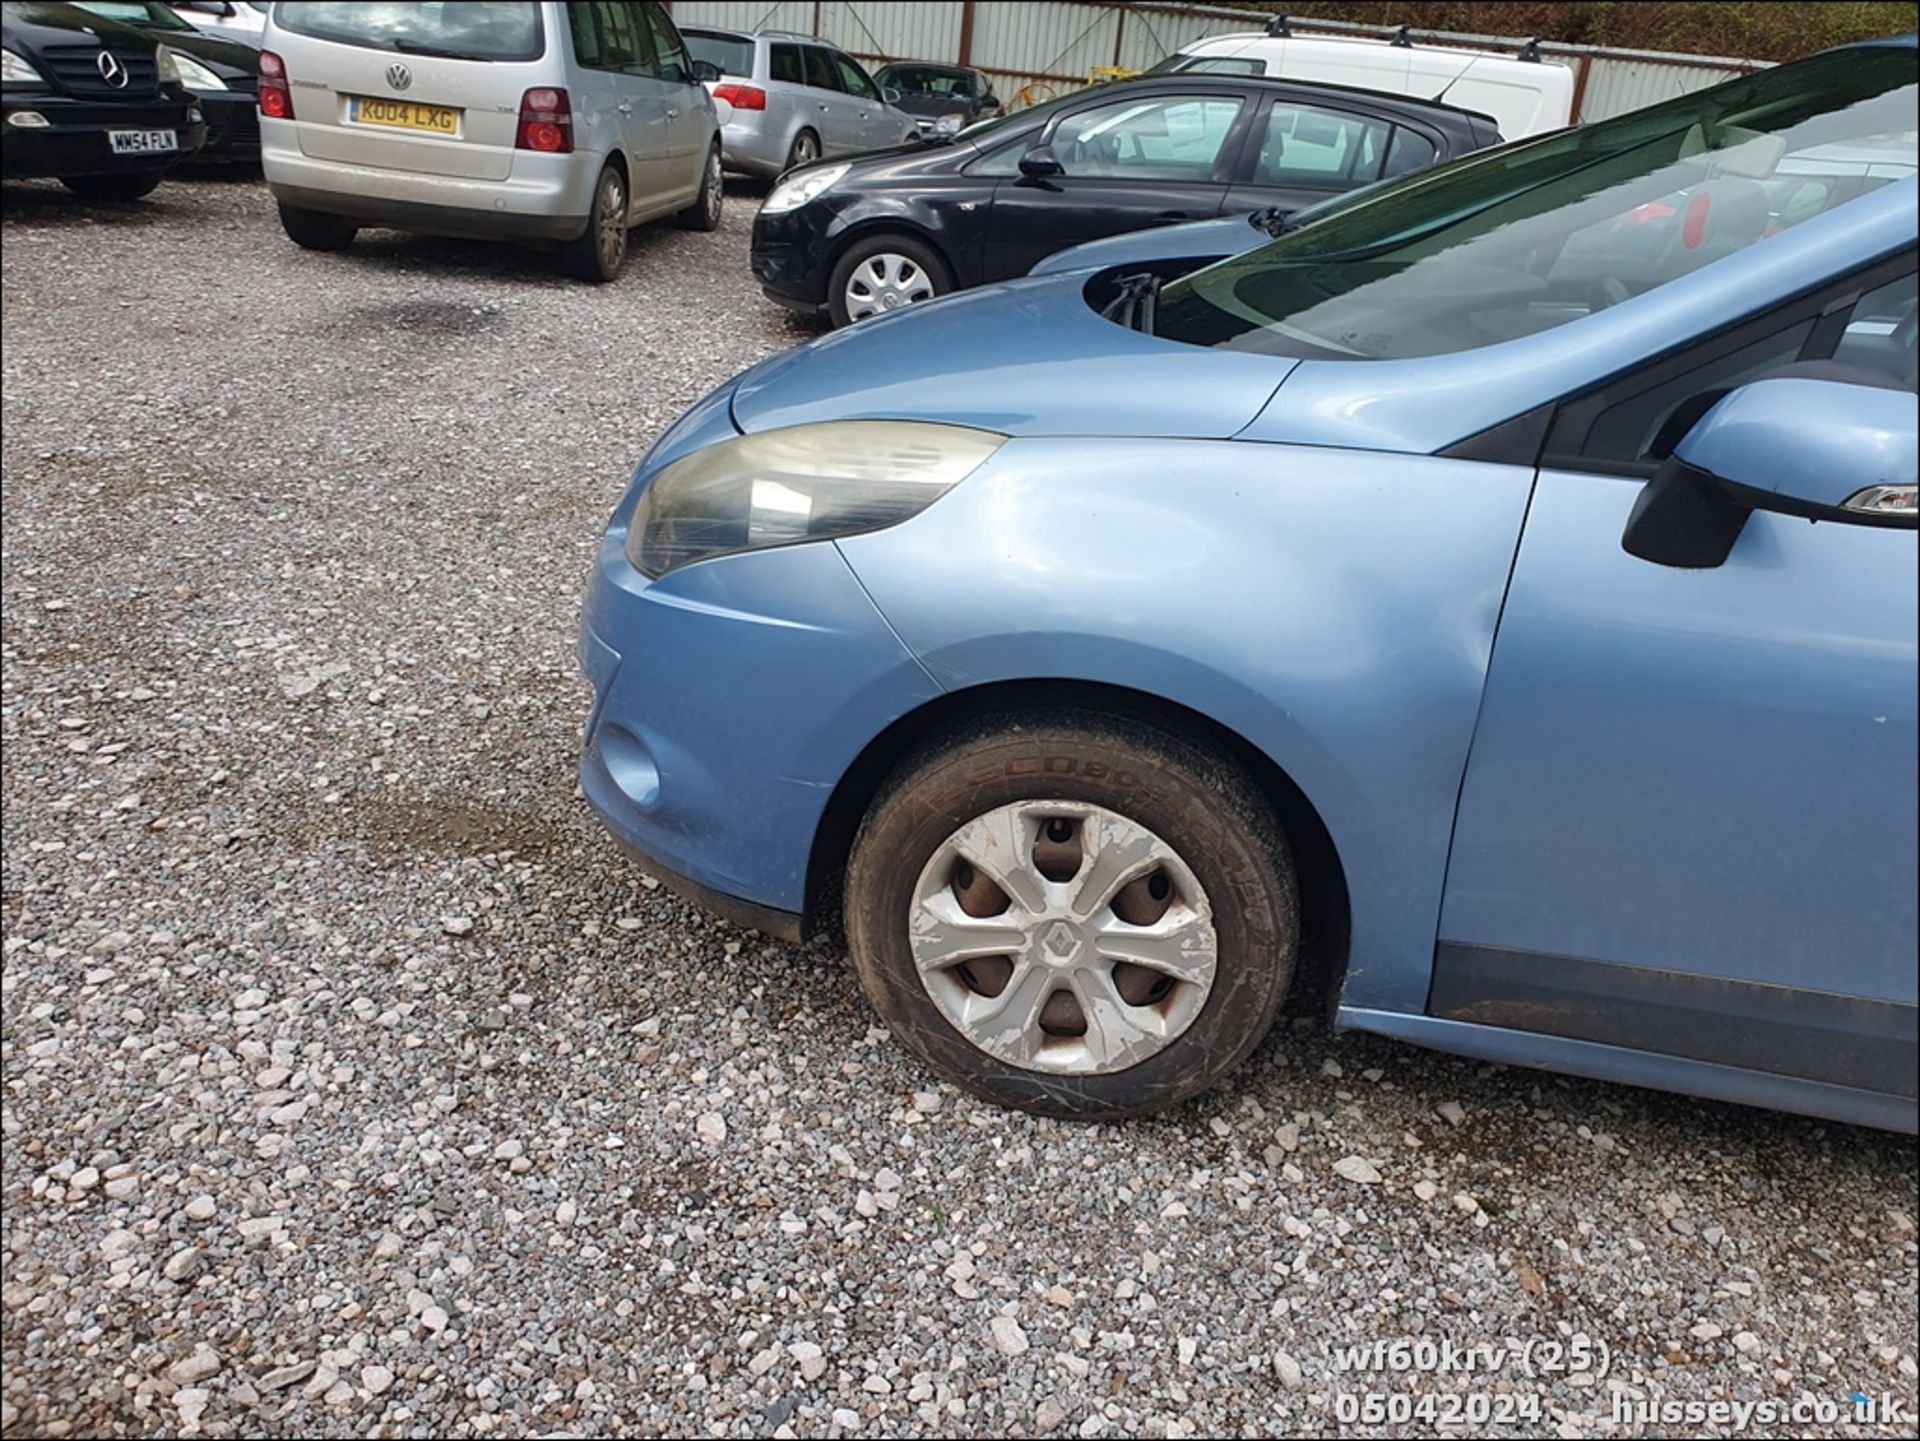 10/60 RENAULT SCENIC EXPRESSION DCI 105 - 1461cc 5dr MPV (Blue) - Image 26 of 50